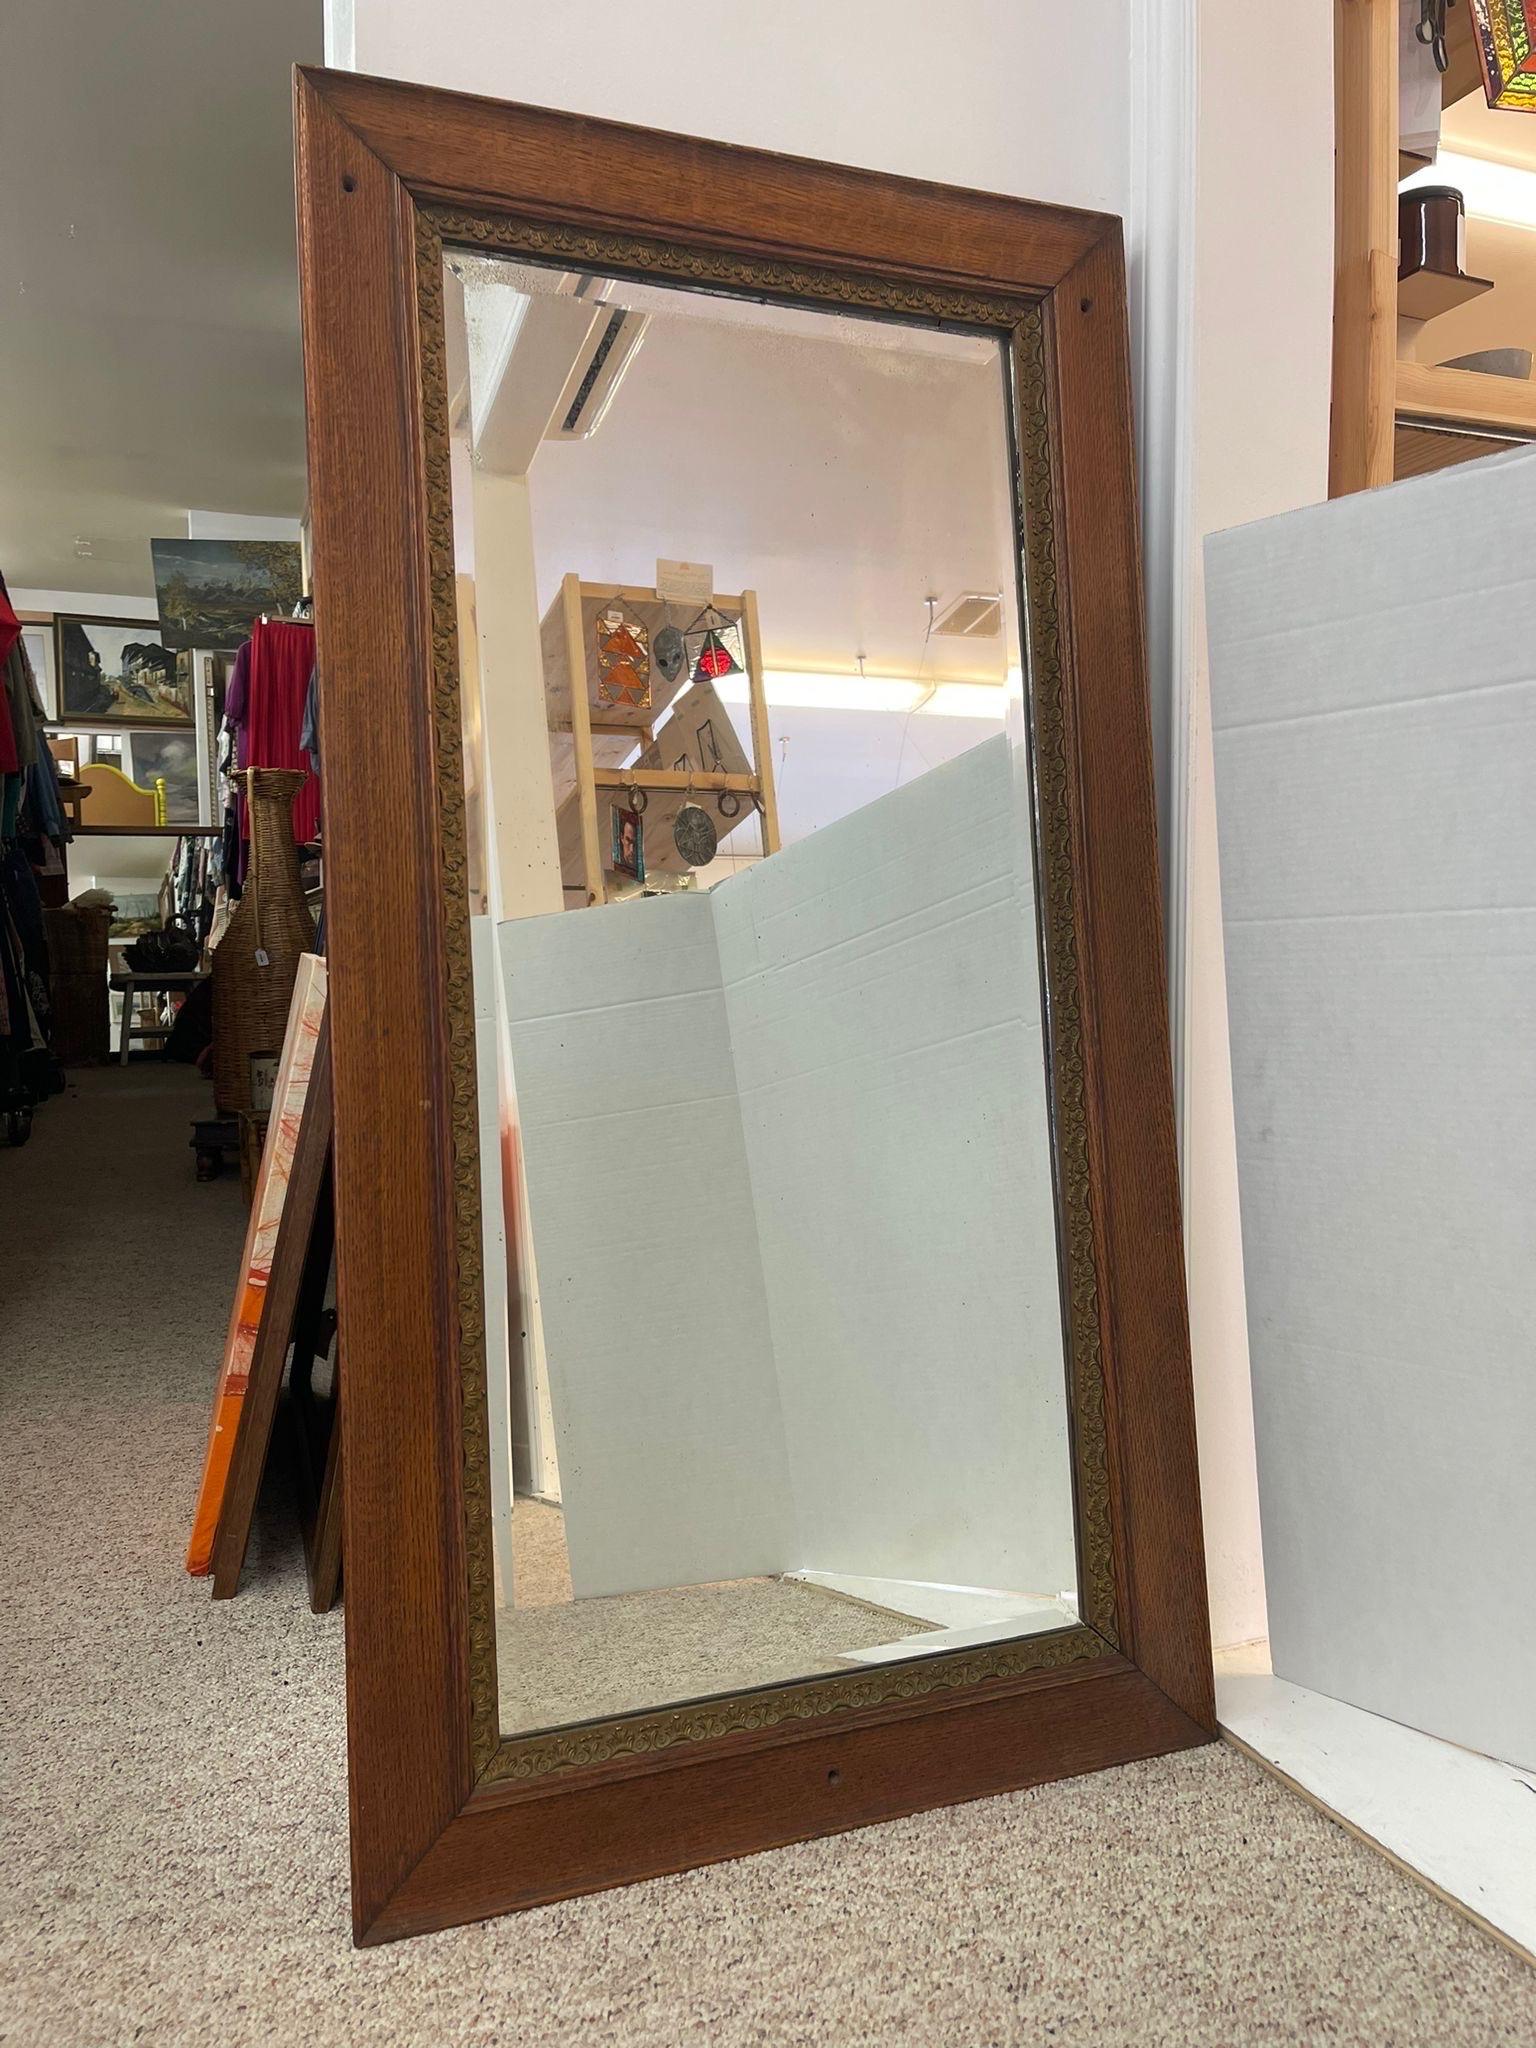 Beveled mirror with wooden frame. The gold toned banding around the frame provides a beautiful accent. Slight Petina to the glass due to age. Vintage Condition Consistent with Age as Pictured.

Dimensions. 25 W ; 1 D ; 48 H